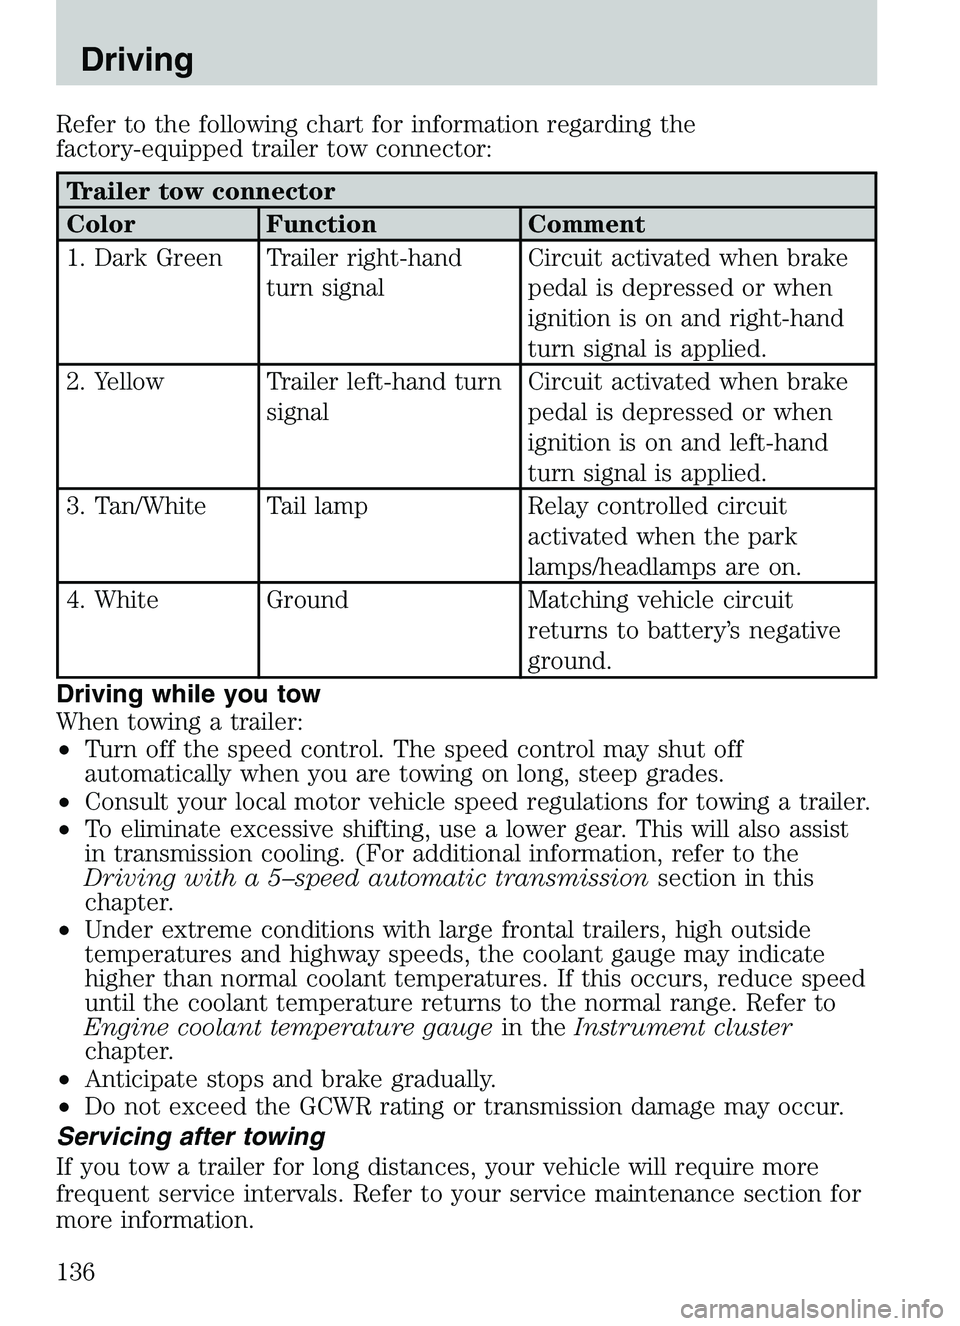 MAZDA MODEL B4000 2003  Owners Manual Refer to the following chart for information regarding the
factory-equipped trailer tow connector:
Trailer tow connector
Color Function Comment
1. Dark Green Trailer right-handturn signal Circuit acti